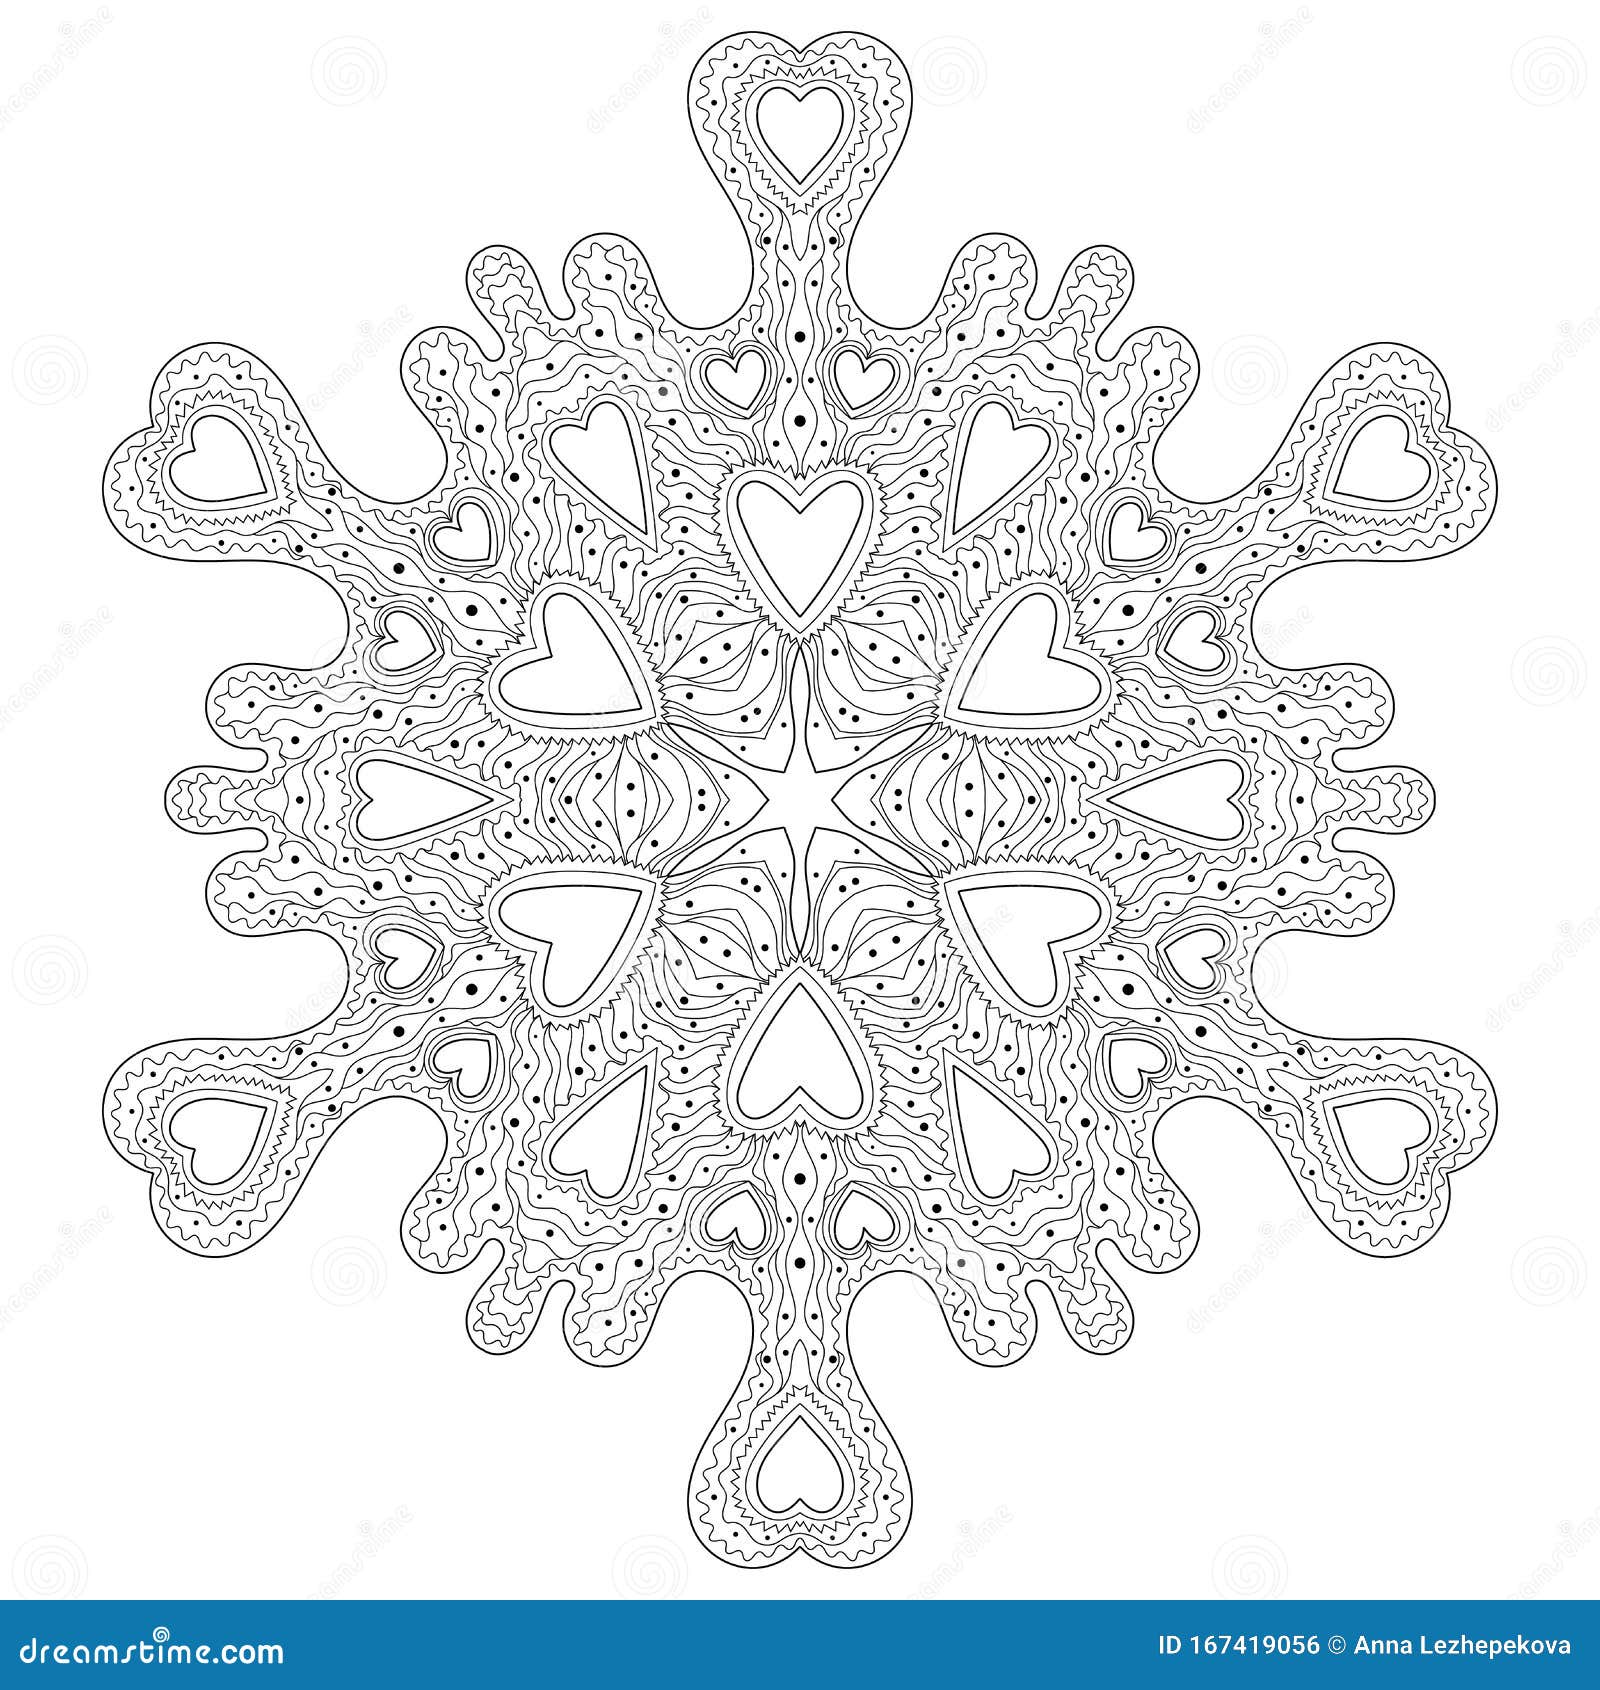 Coloring page with snowflake with editable line stock vector